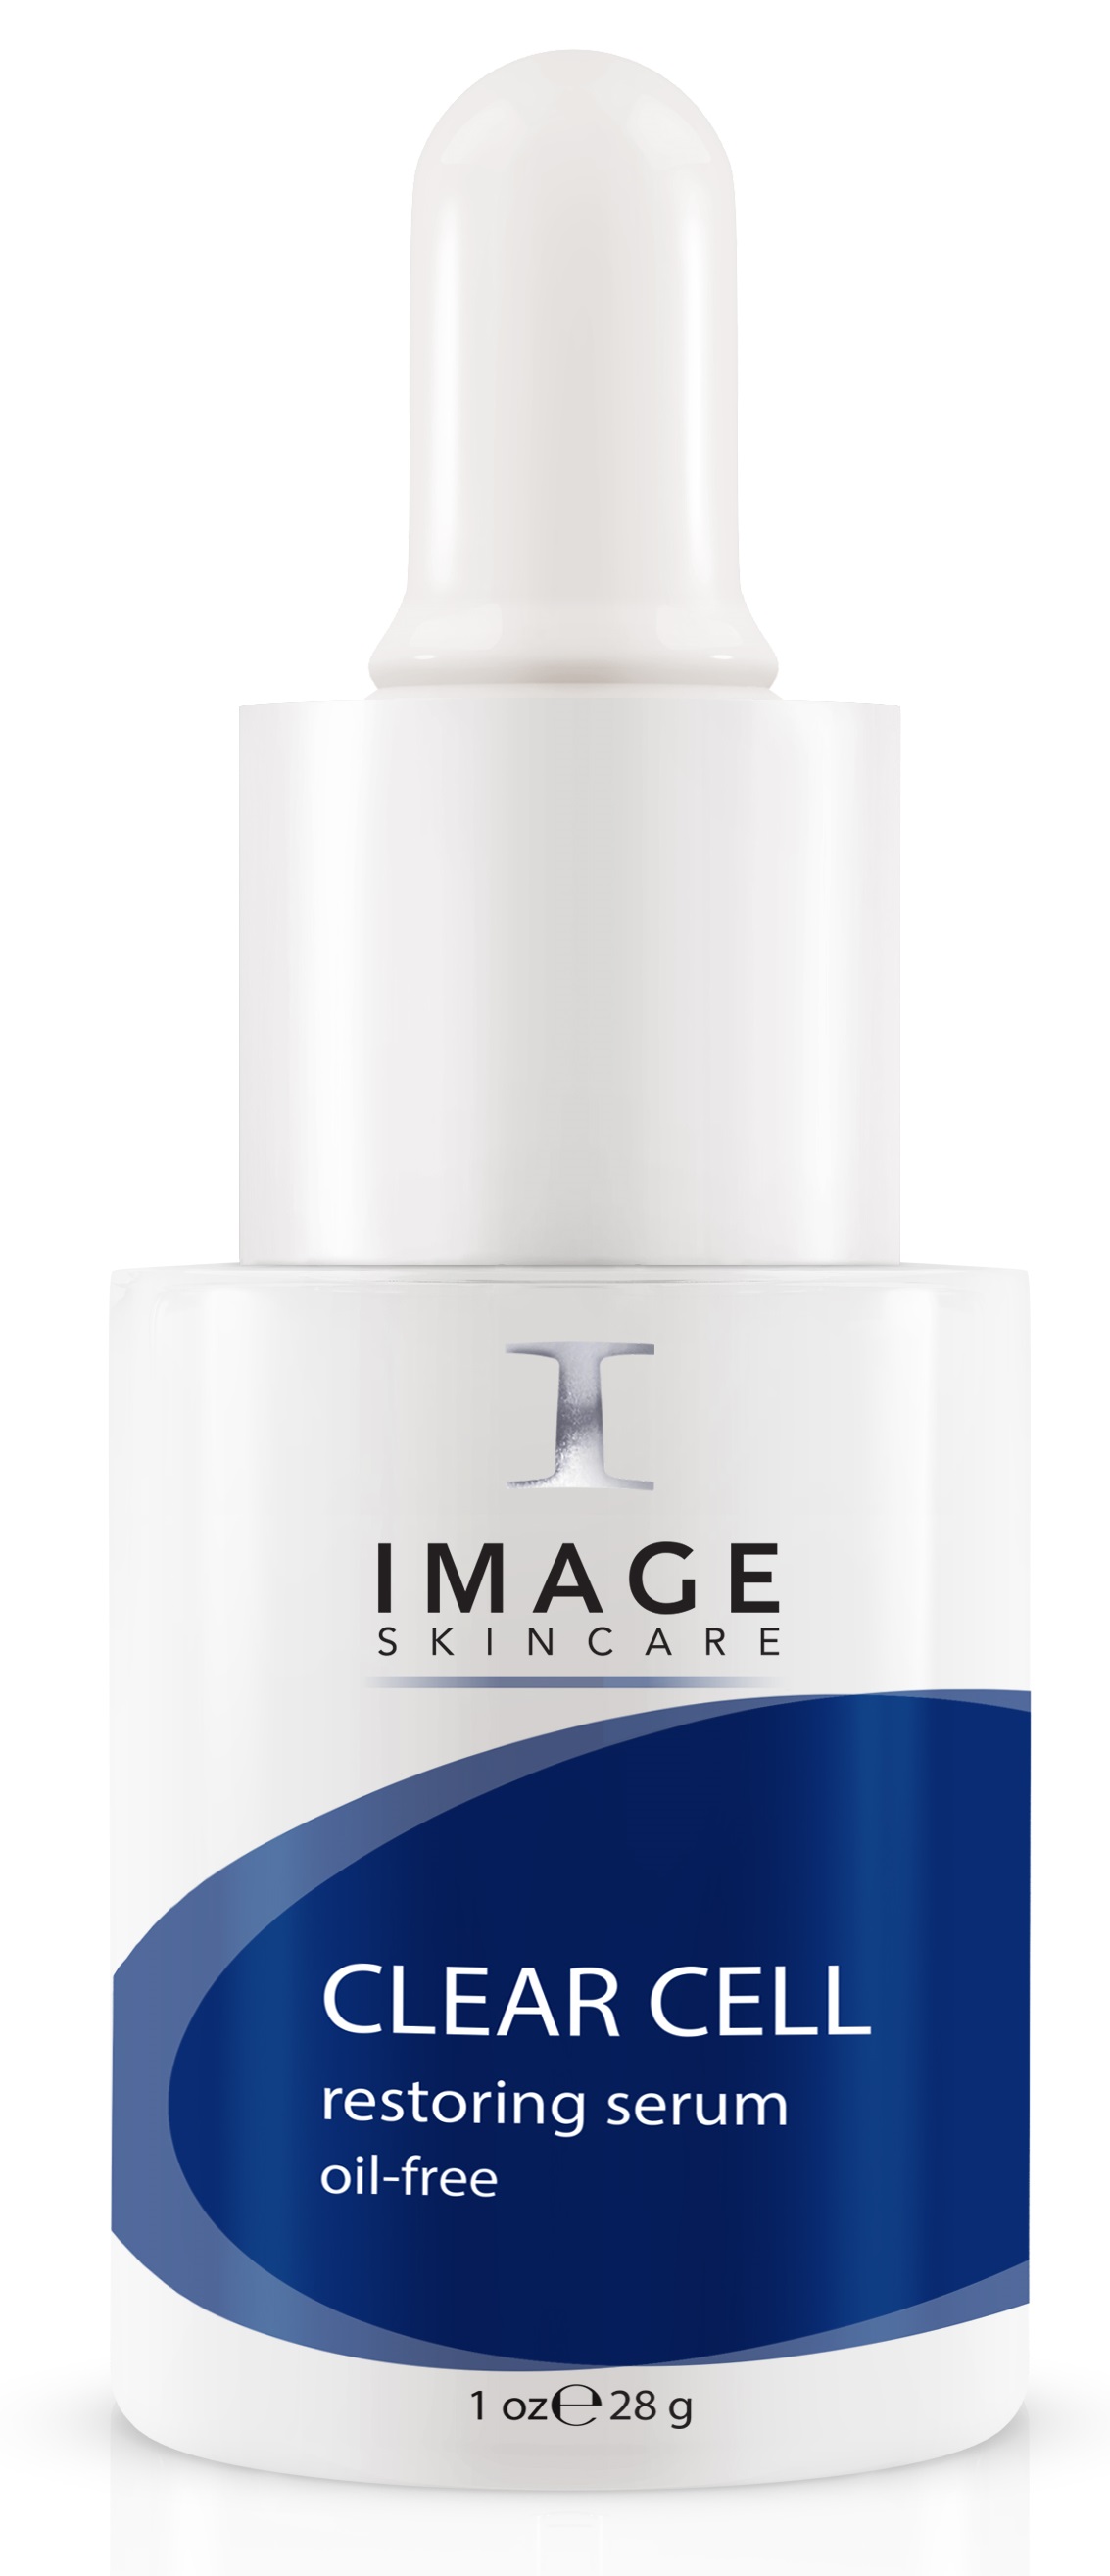 Image Skincare CLEAR CELL Restoring Serum